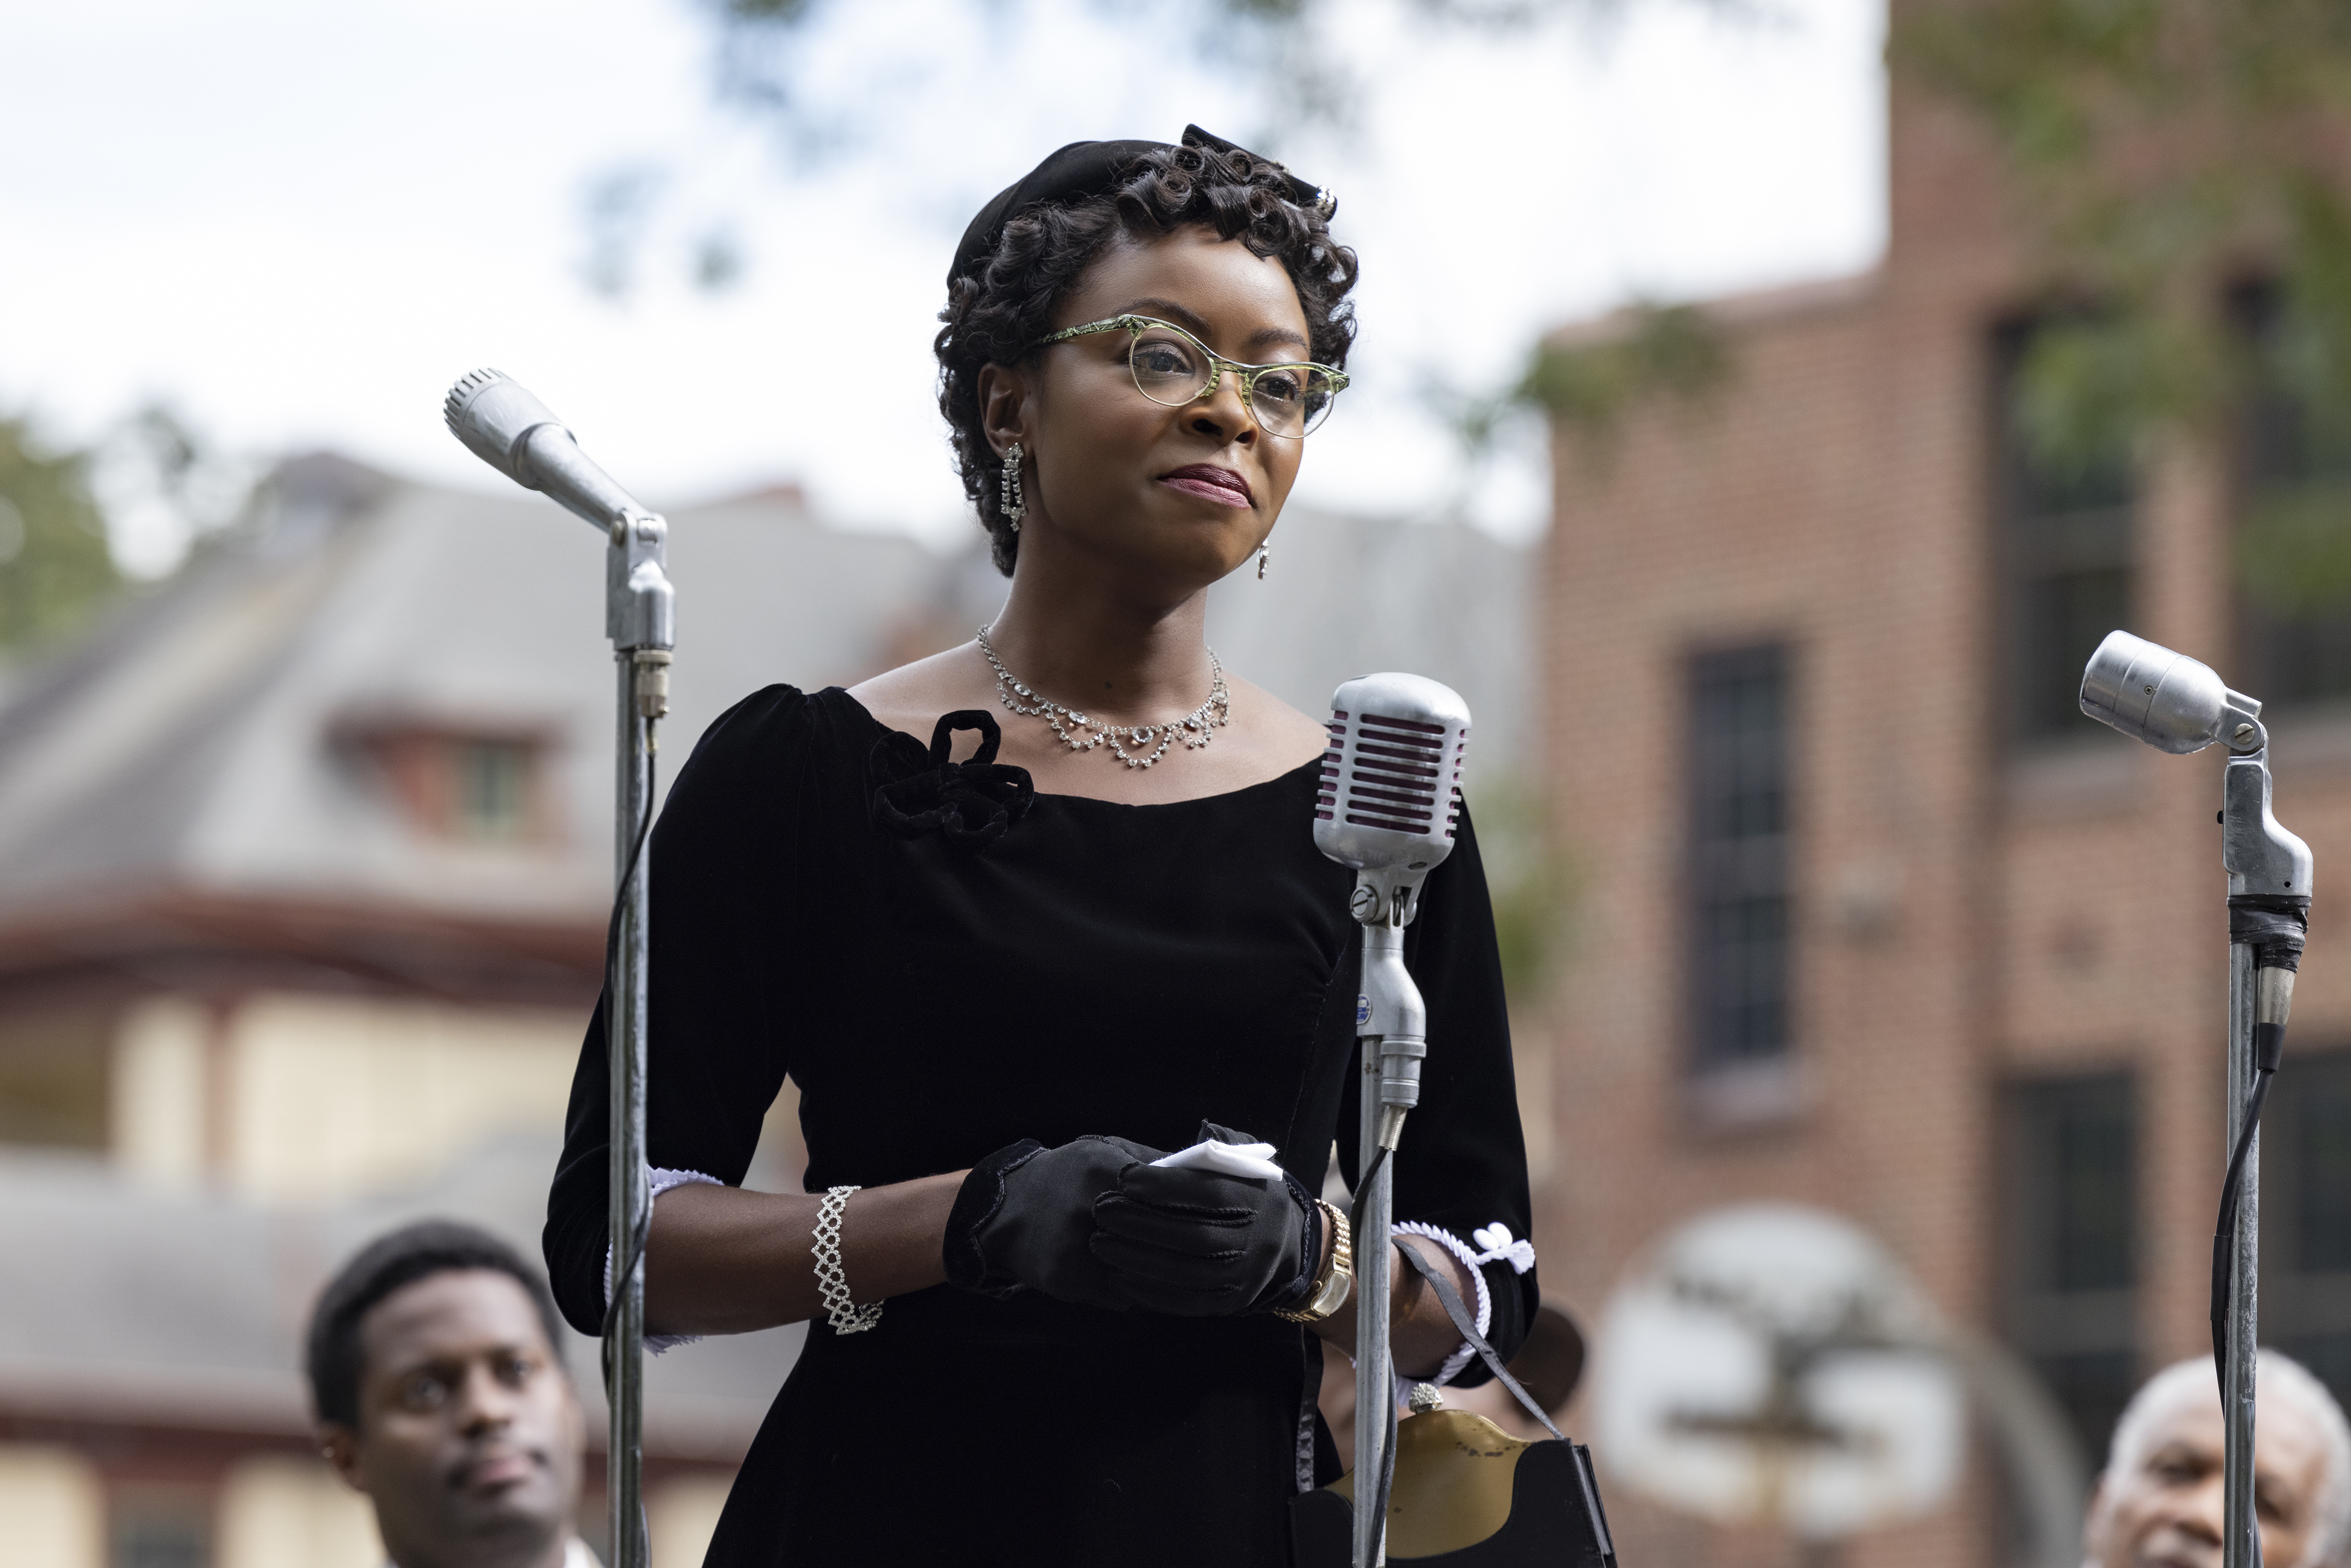 Danielle Deadwyler as Mamie Till Mobley in TILL, directed by Chinonye Chukwu. (Lynsey Weatherspoon—Orion Pictures)